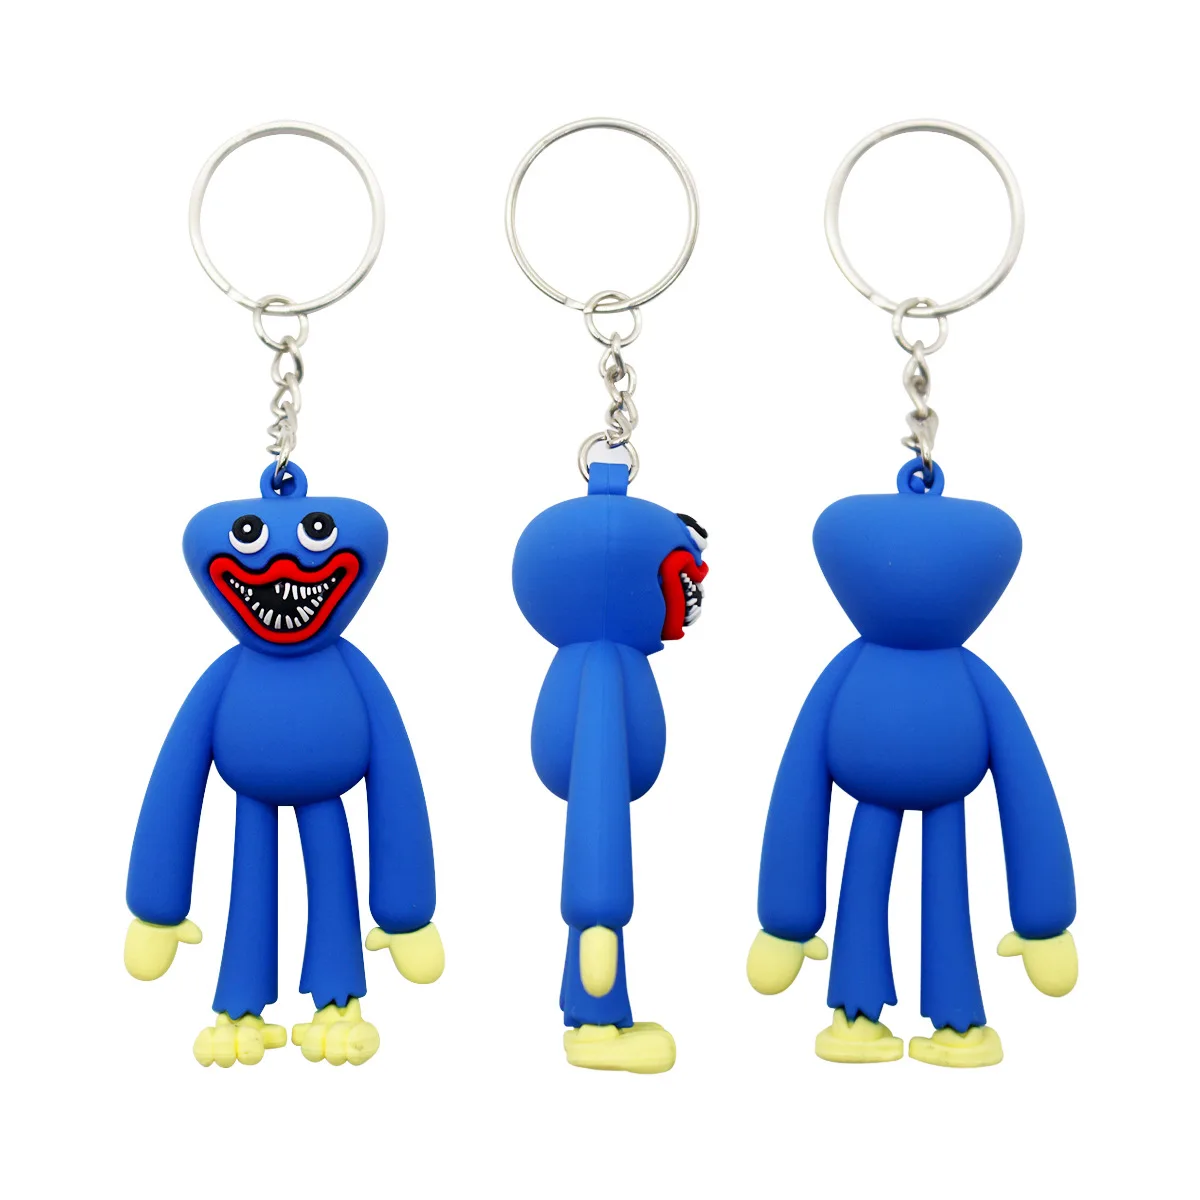 

2022 Kawaii Poppy Playtime Bobby Keychain Huggy Wuggy Monster Game Peripheral Charm Keychain Wholesale аниме фигурки Gift Toys